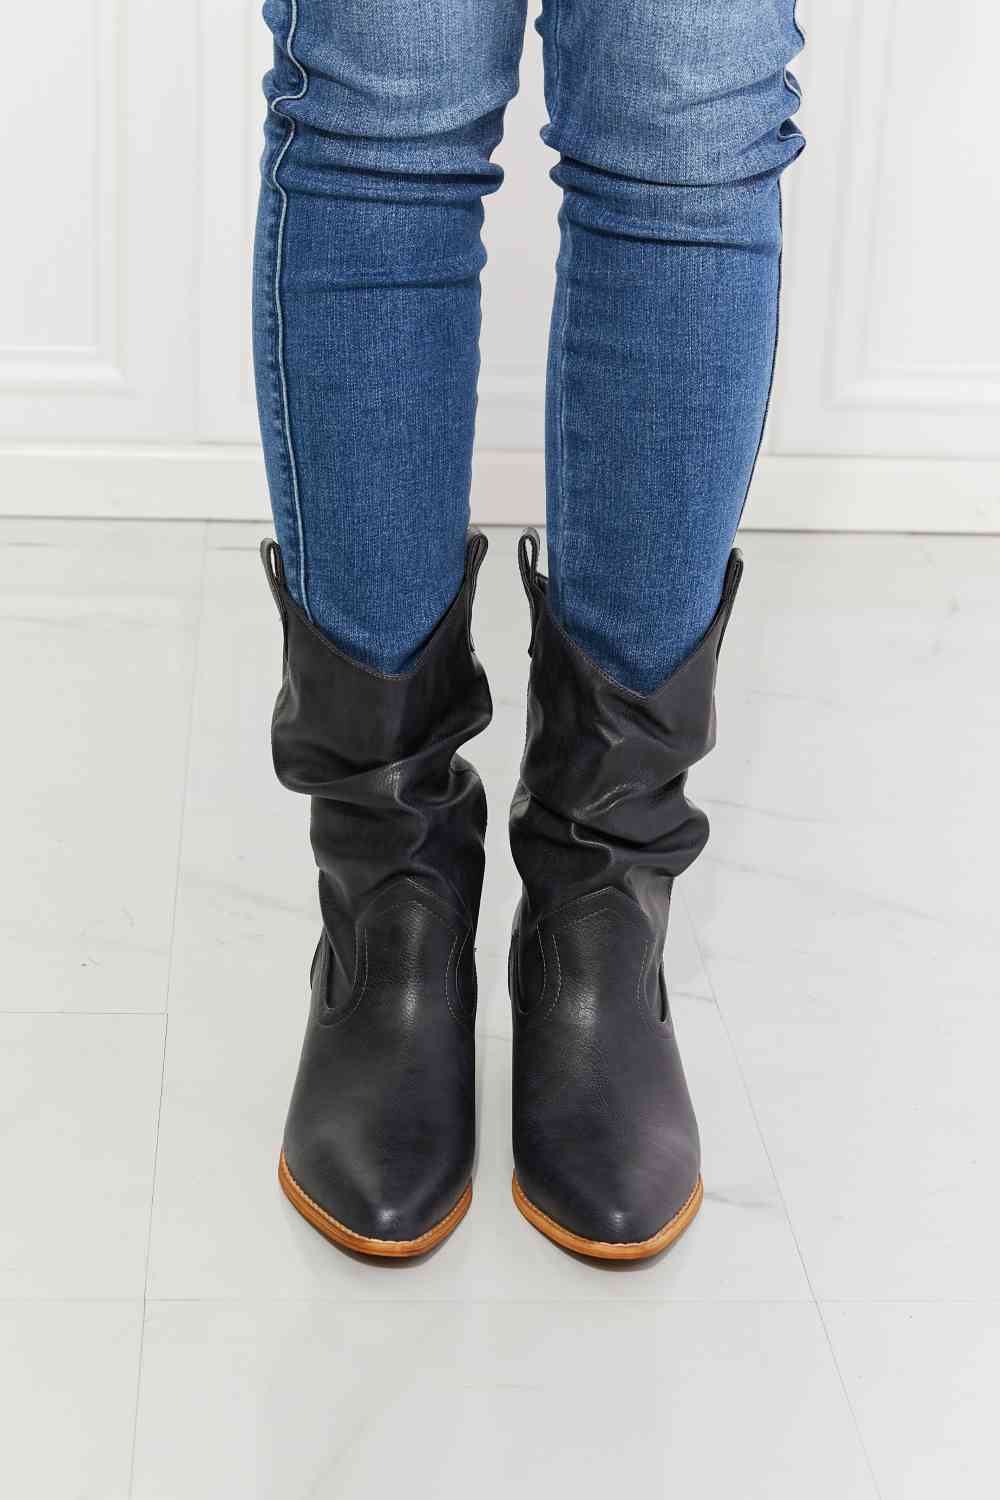 MMShoes Navy Scrunch Cowboy Boots - Better in Texas